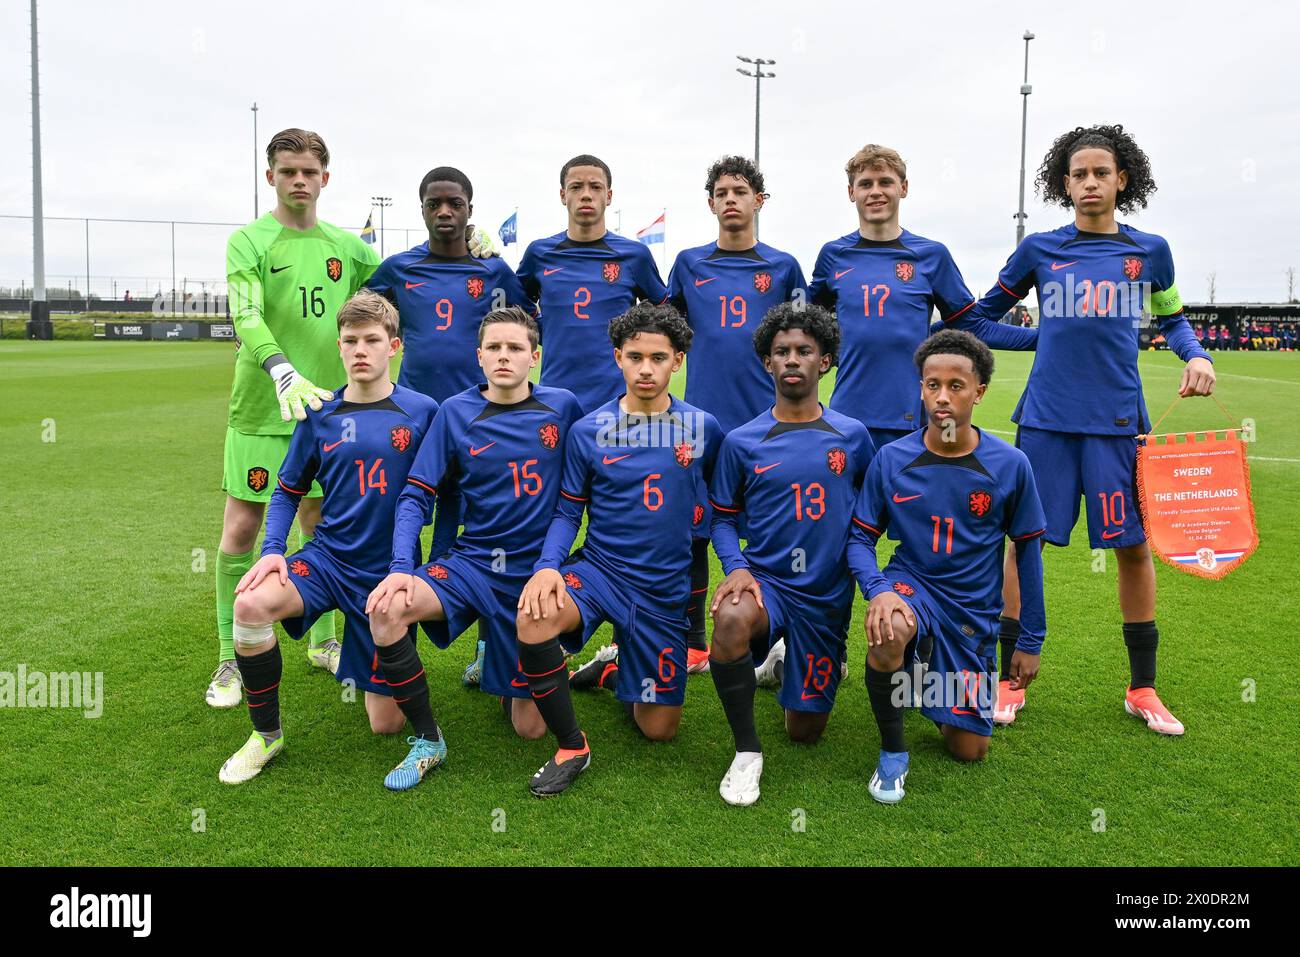 players of The Netherlands with goalkeeper Finn Mulder (16) of The Netherlands, Pharell Nash (9) of The Netherlands, Christopher Fafiani (2) of The Netherlands, Jason Inocencio (19) of The Netherlands, Sil Blokhuis (17) of The Netherlands, Shuryjano Cornecion (10) of The Netherlands, Thijs van Ingen (14) of The Netherlands, Ties Kemna (15) of The Netherlands, Givaro Rahajaan (6) of The Netherlands, Djael Akloe (13) of The Netherlands and Mohamed Hassan Abdallah (11) of The Netherlands pose for a team photo during a friendly soccer game between the national under 16 Futures teams of Sweden and Stock Photo